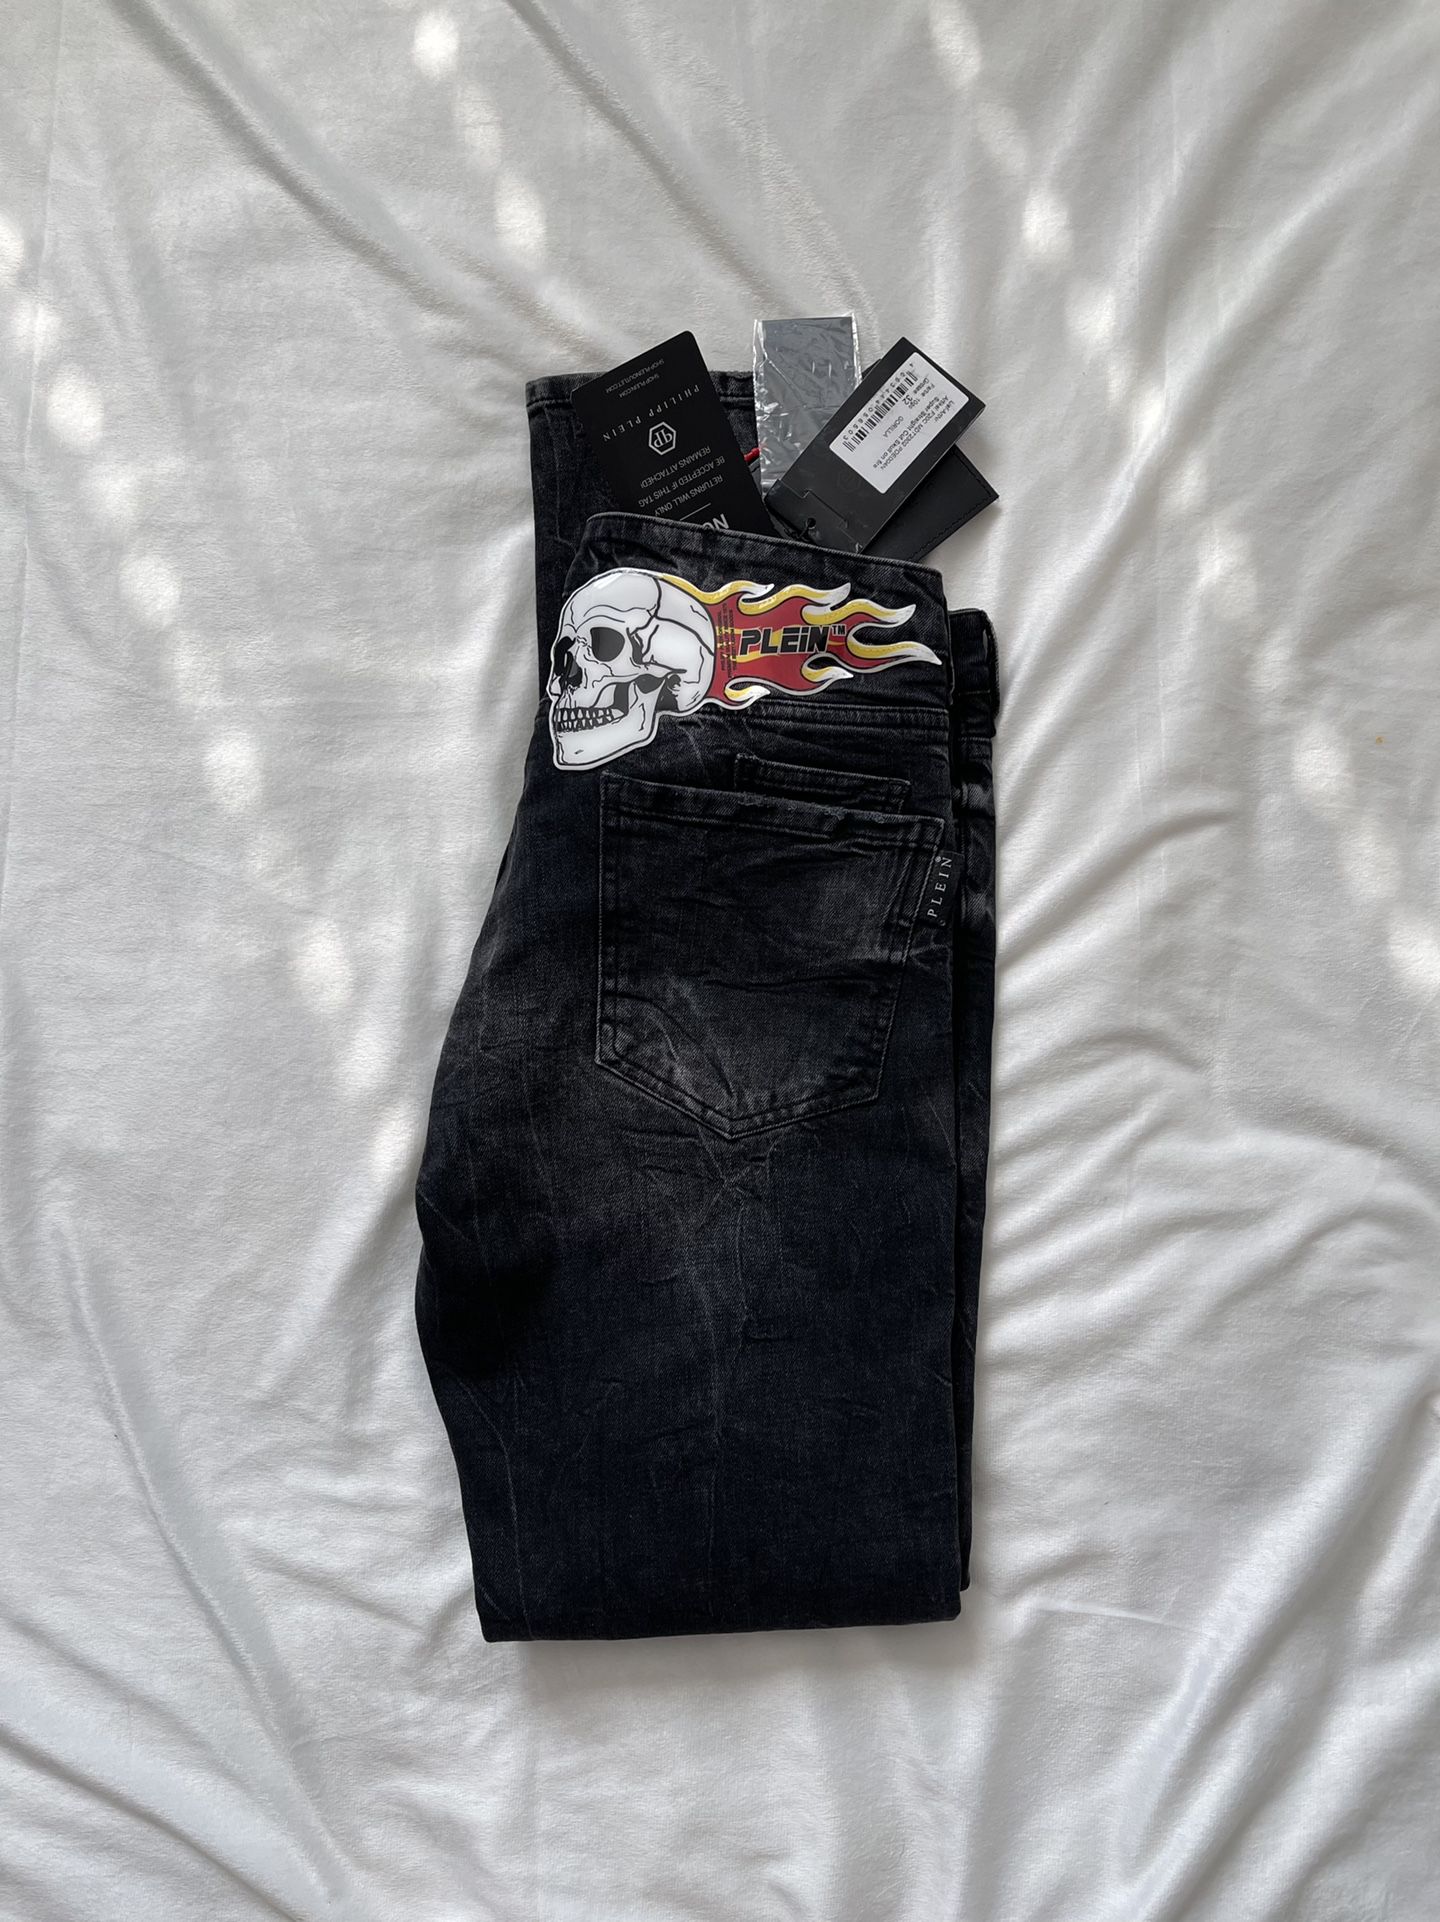 compressie Gepolijst Maladroit Philipp Plein Super Straight Cut Skull On Fire Jeans -100% Authentic -  Proof of Purchase - Brand New - Size - 32 for Sale in Chicago, IL - OfferUp